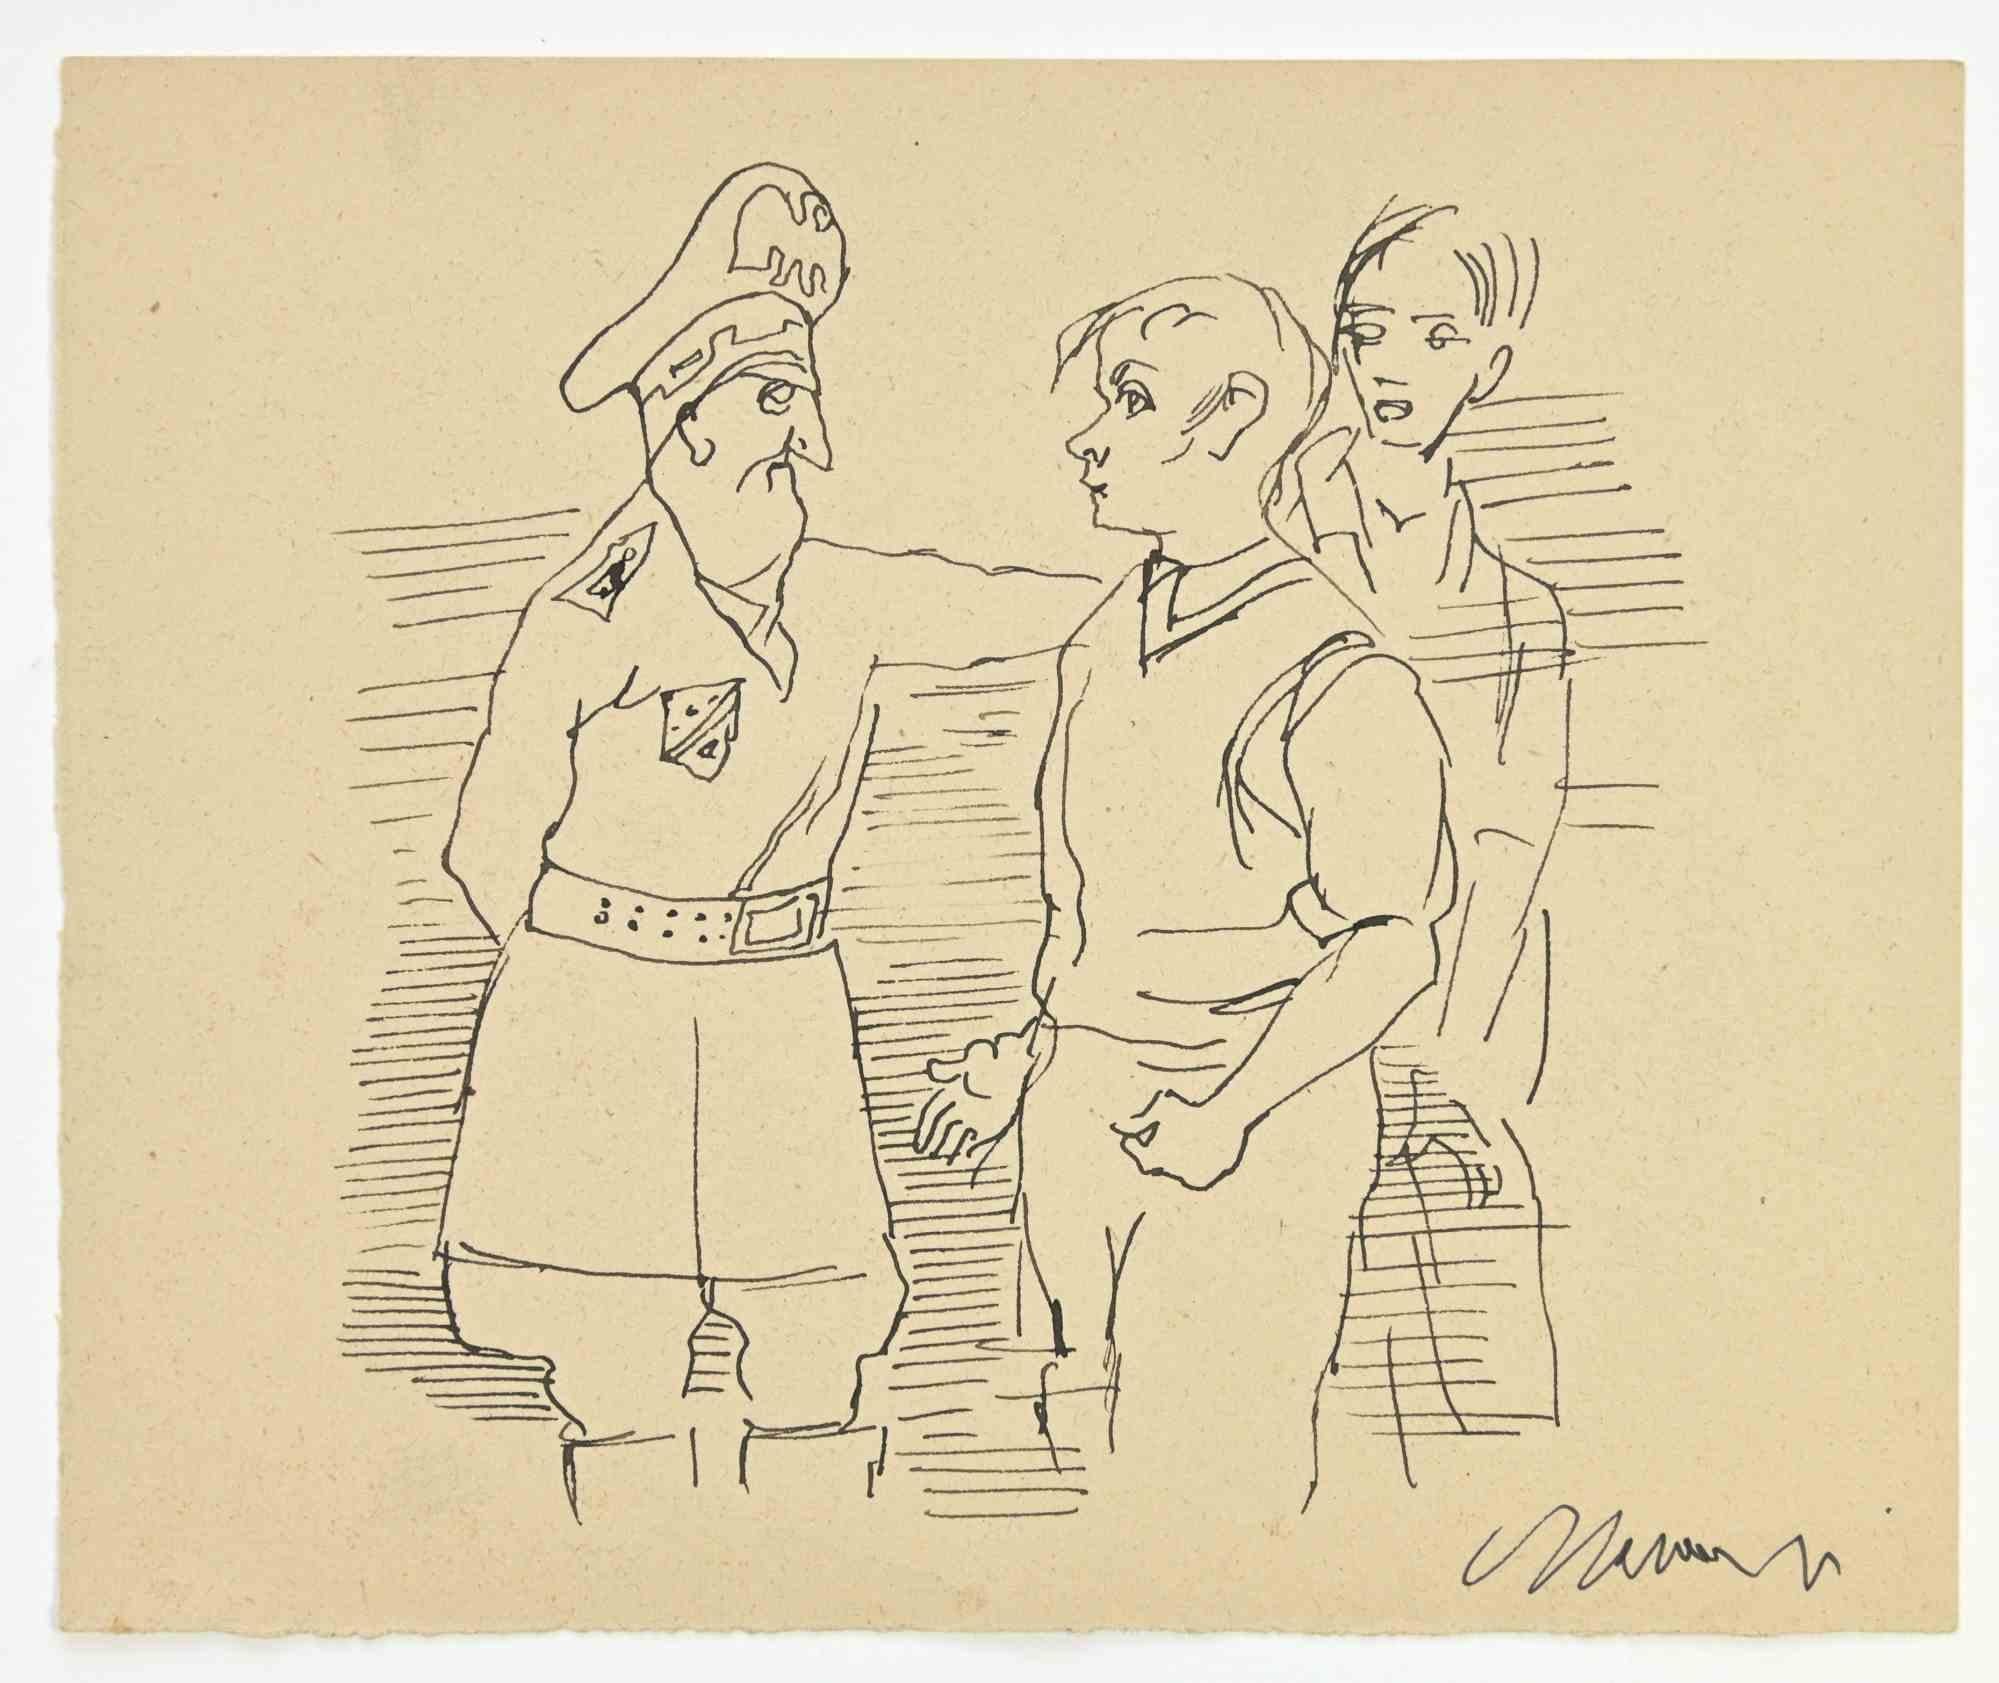 Police and Guys is a Pen Drawing realized by Mino Maccari  (1924-1989) in 1947 ca.

Hand-signed on the lower.

Good conditions.

Mino Maccari (Siena, 1924-Rome, June 16, 1989) was an Italian writer, painter, engraver and journalist, winner of the